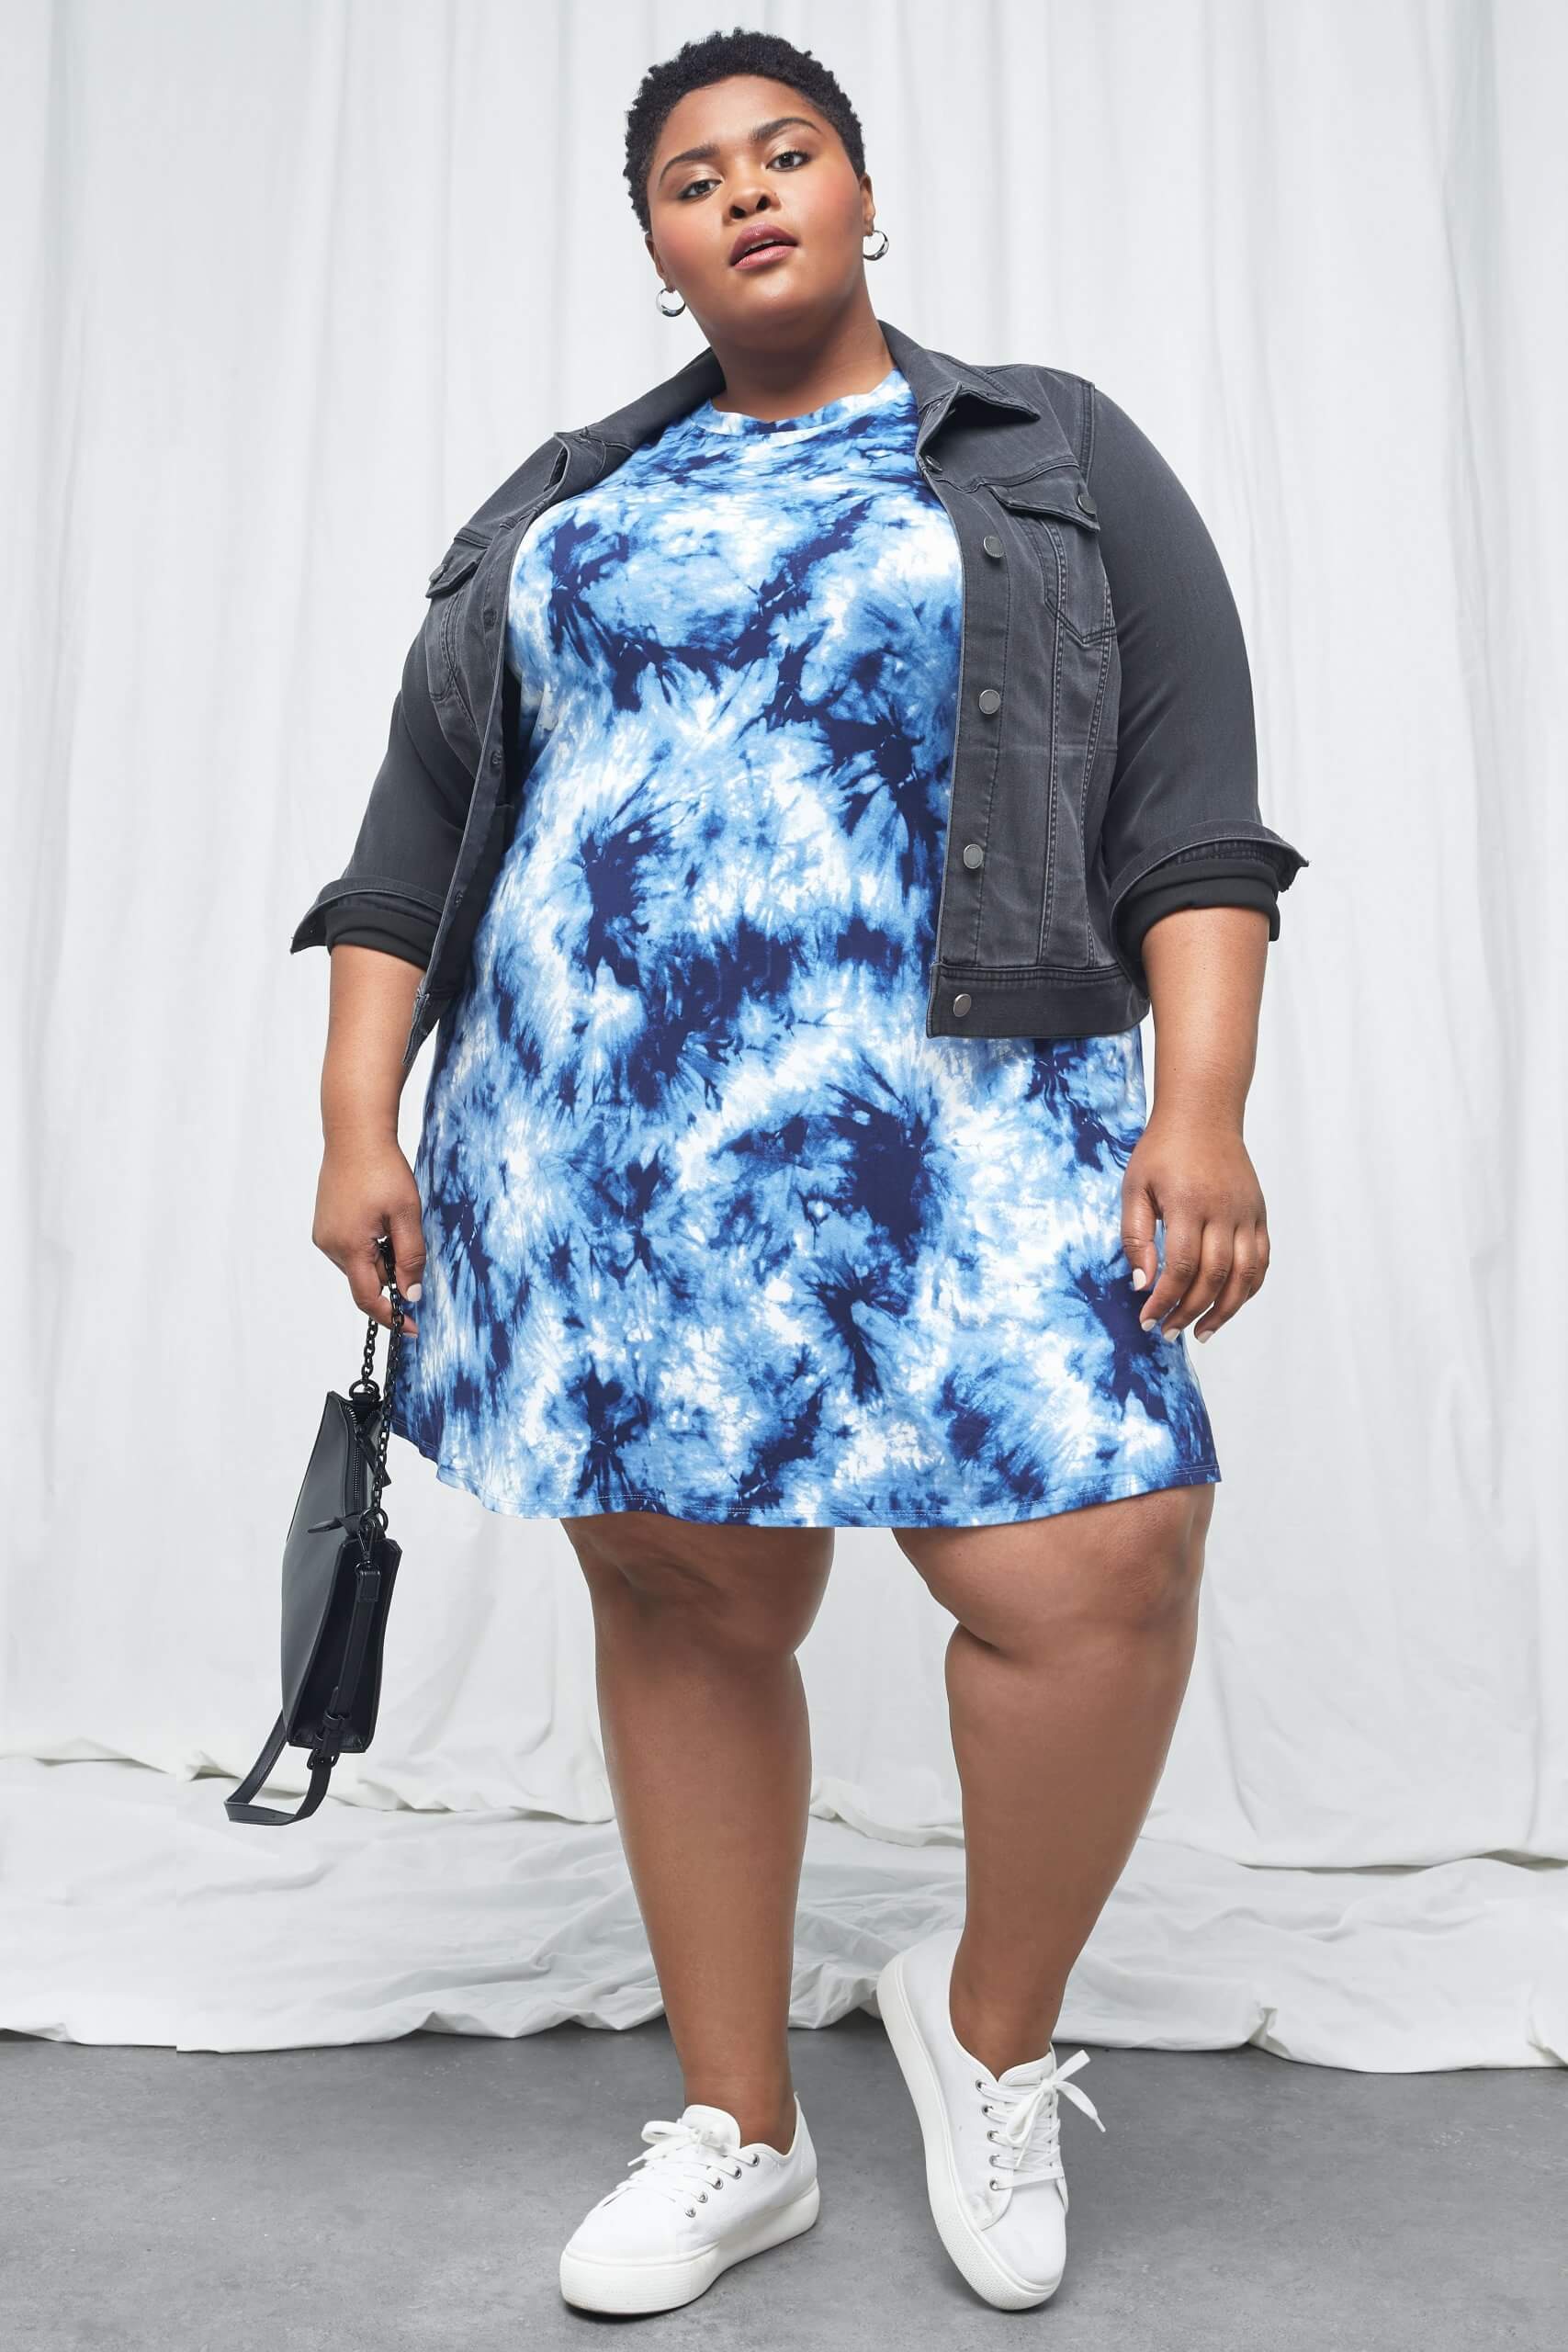 This Is What Plus-Size Clothes Look Like On Plus-Size Women